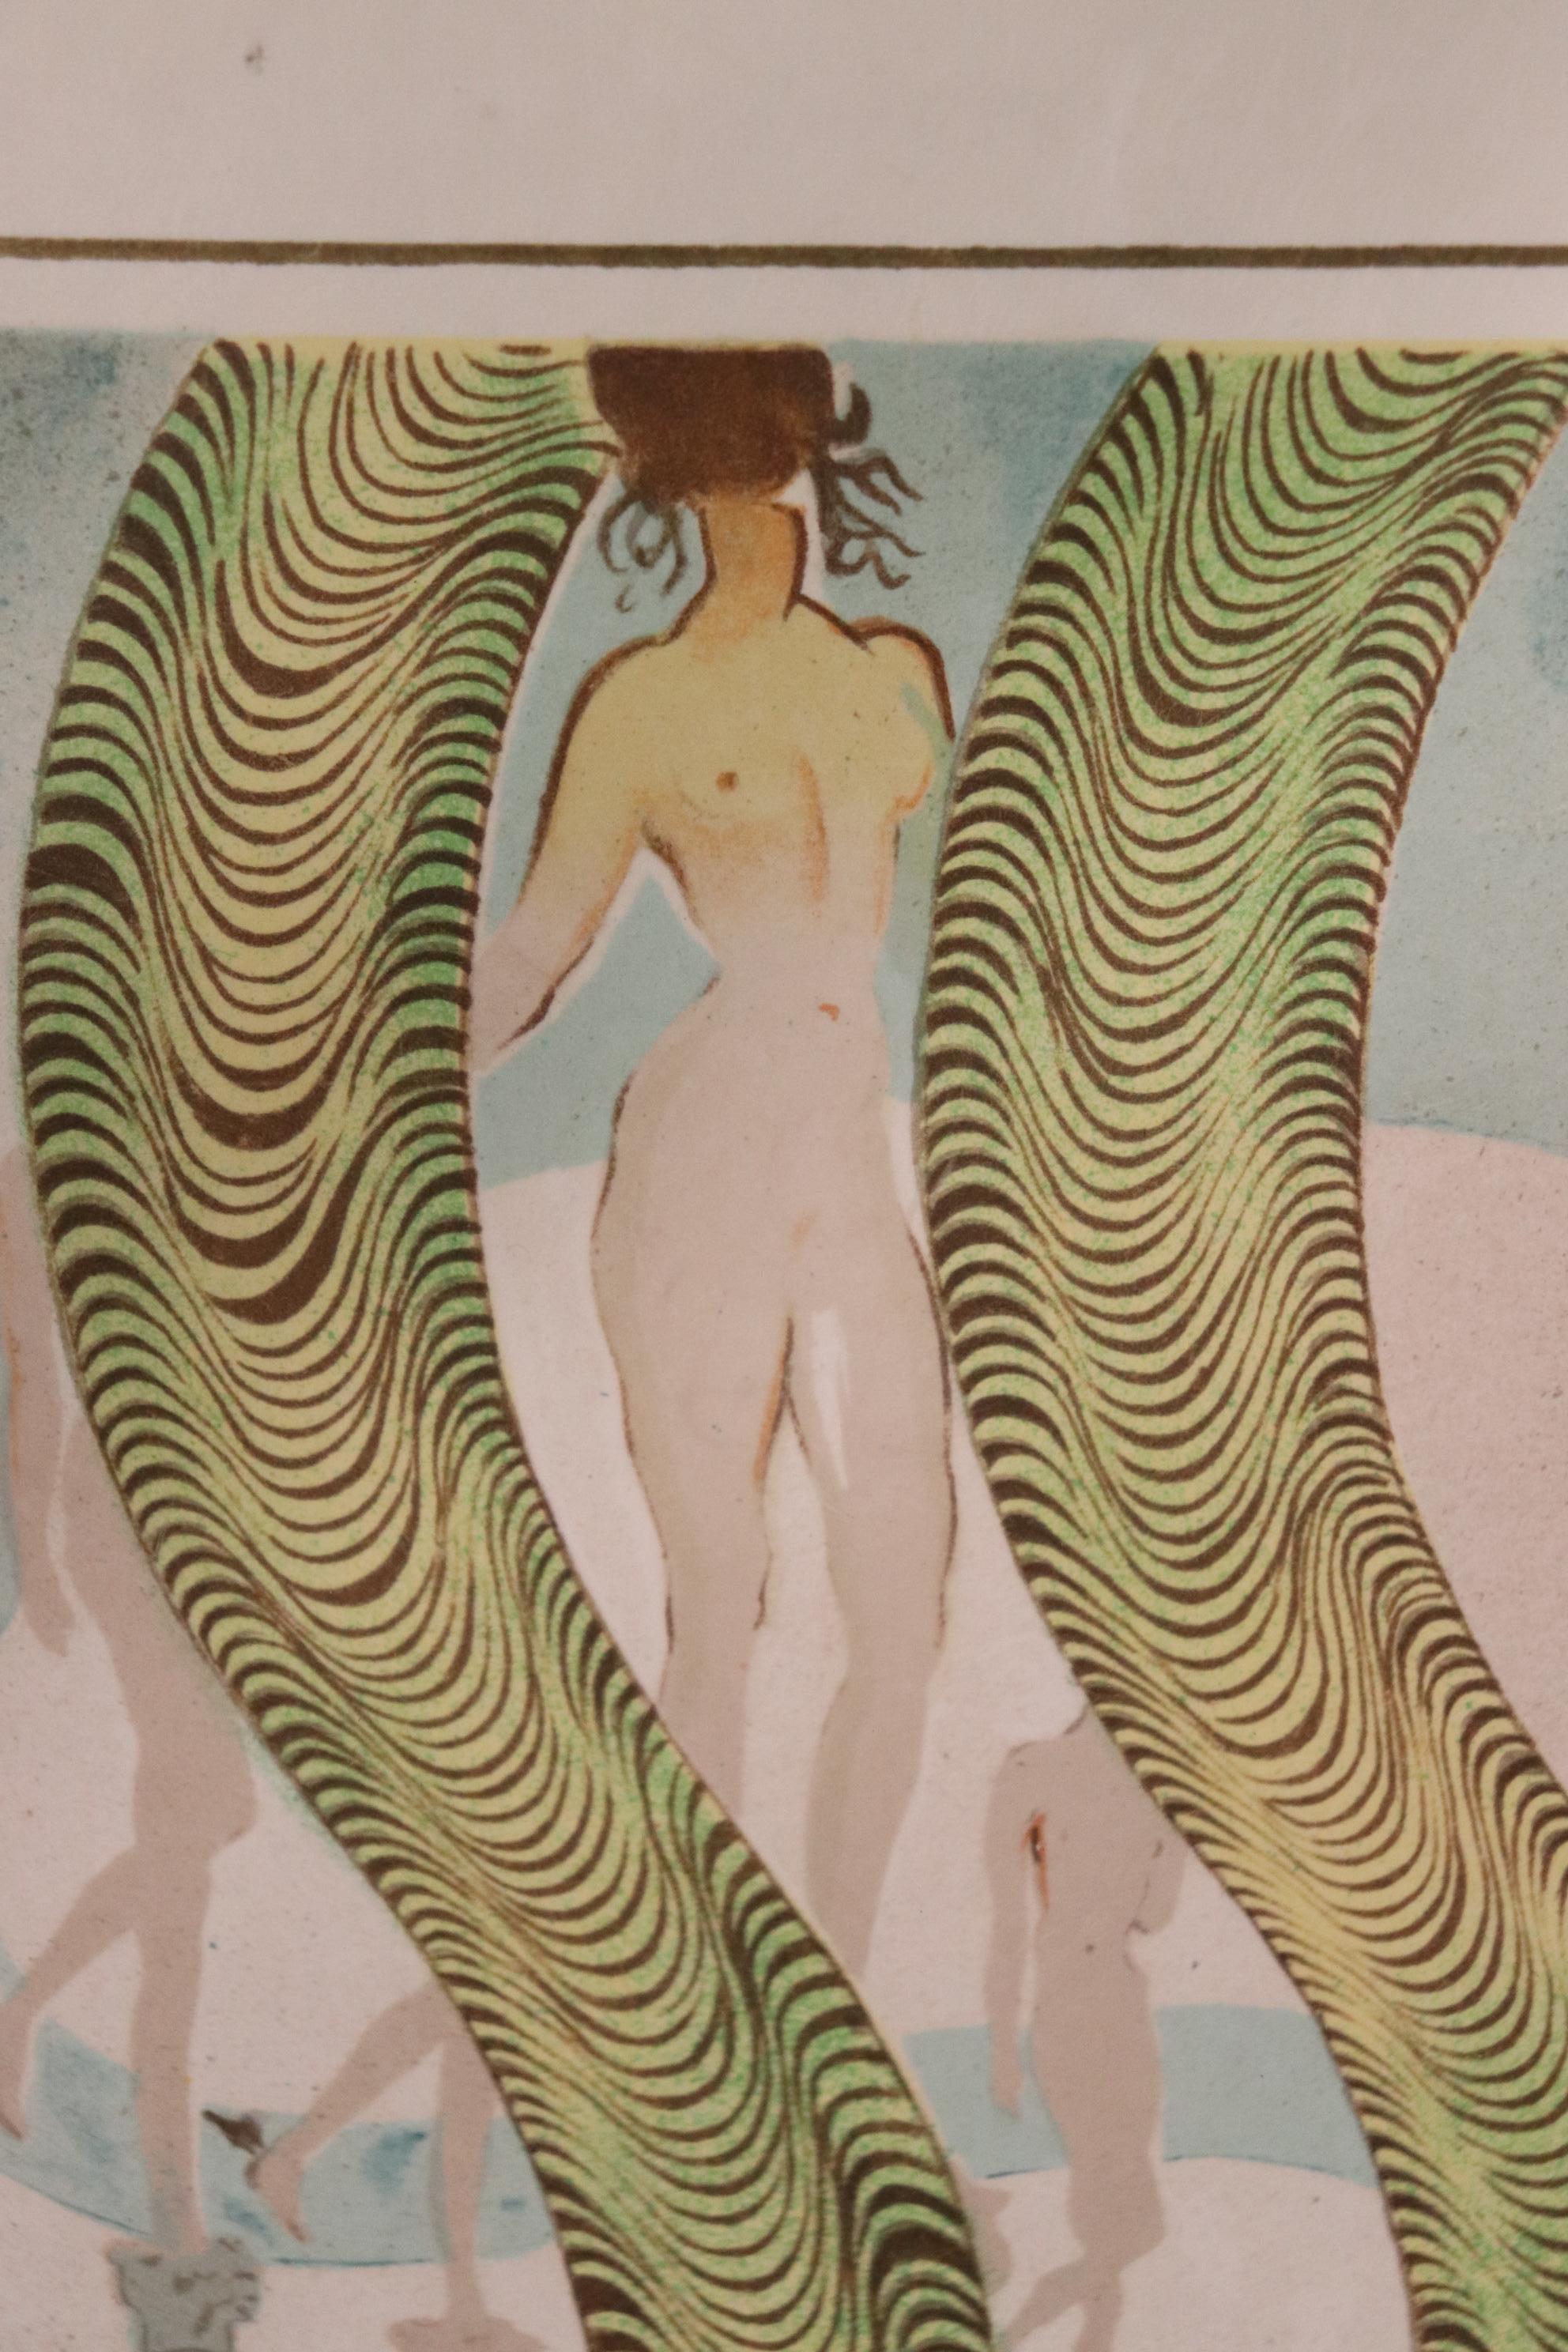 Surreal Figural Signed Print with Nudes 2